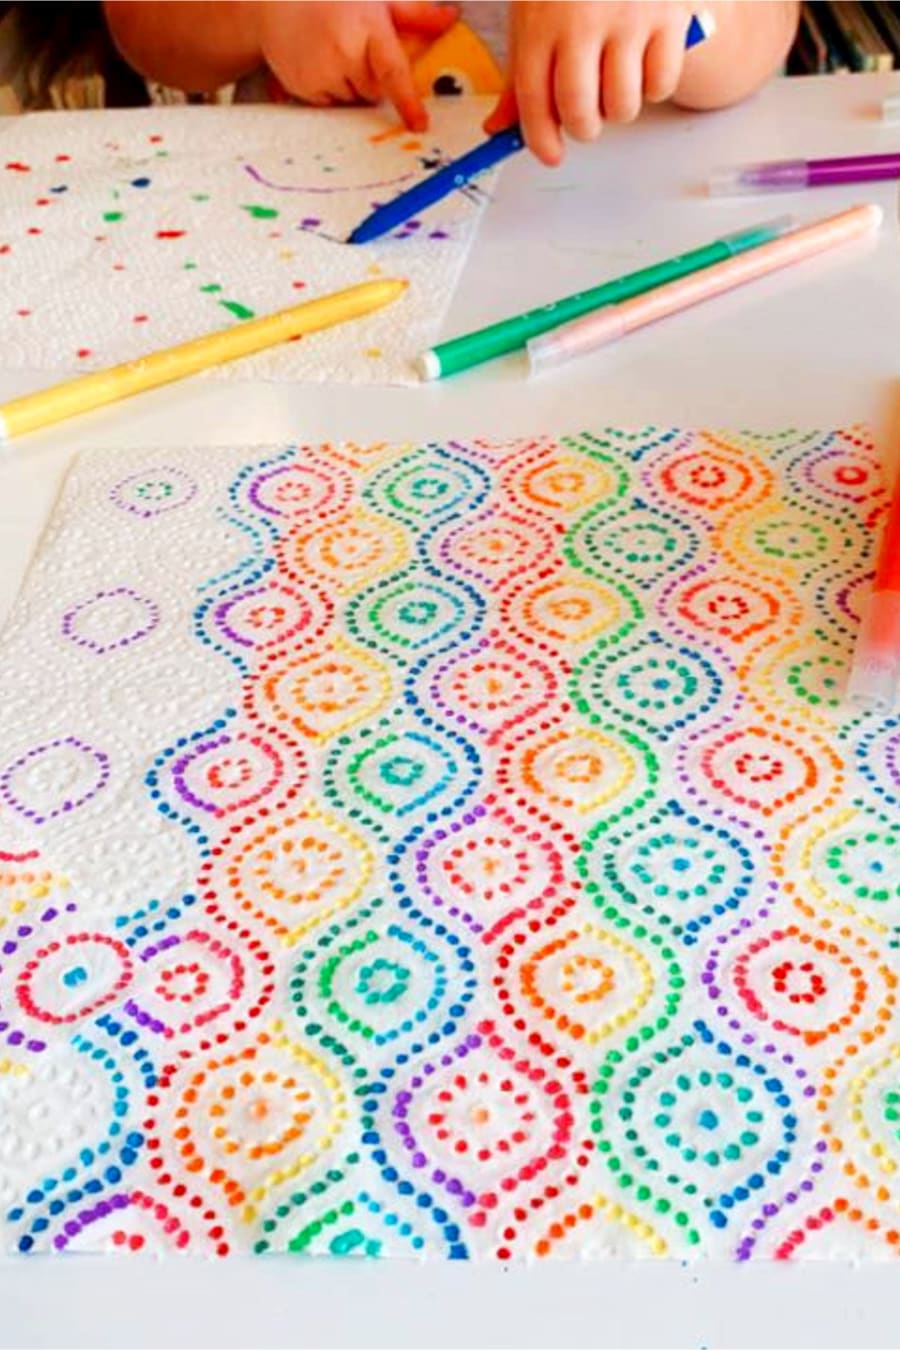 crafts to do when bored at home - fun coloring crafts to do with friends or bored alone